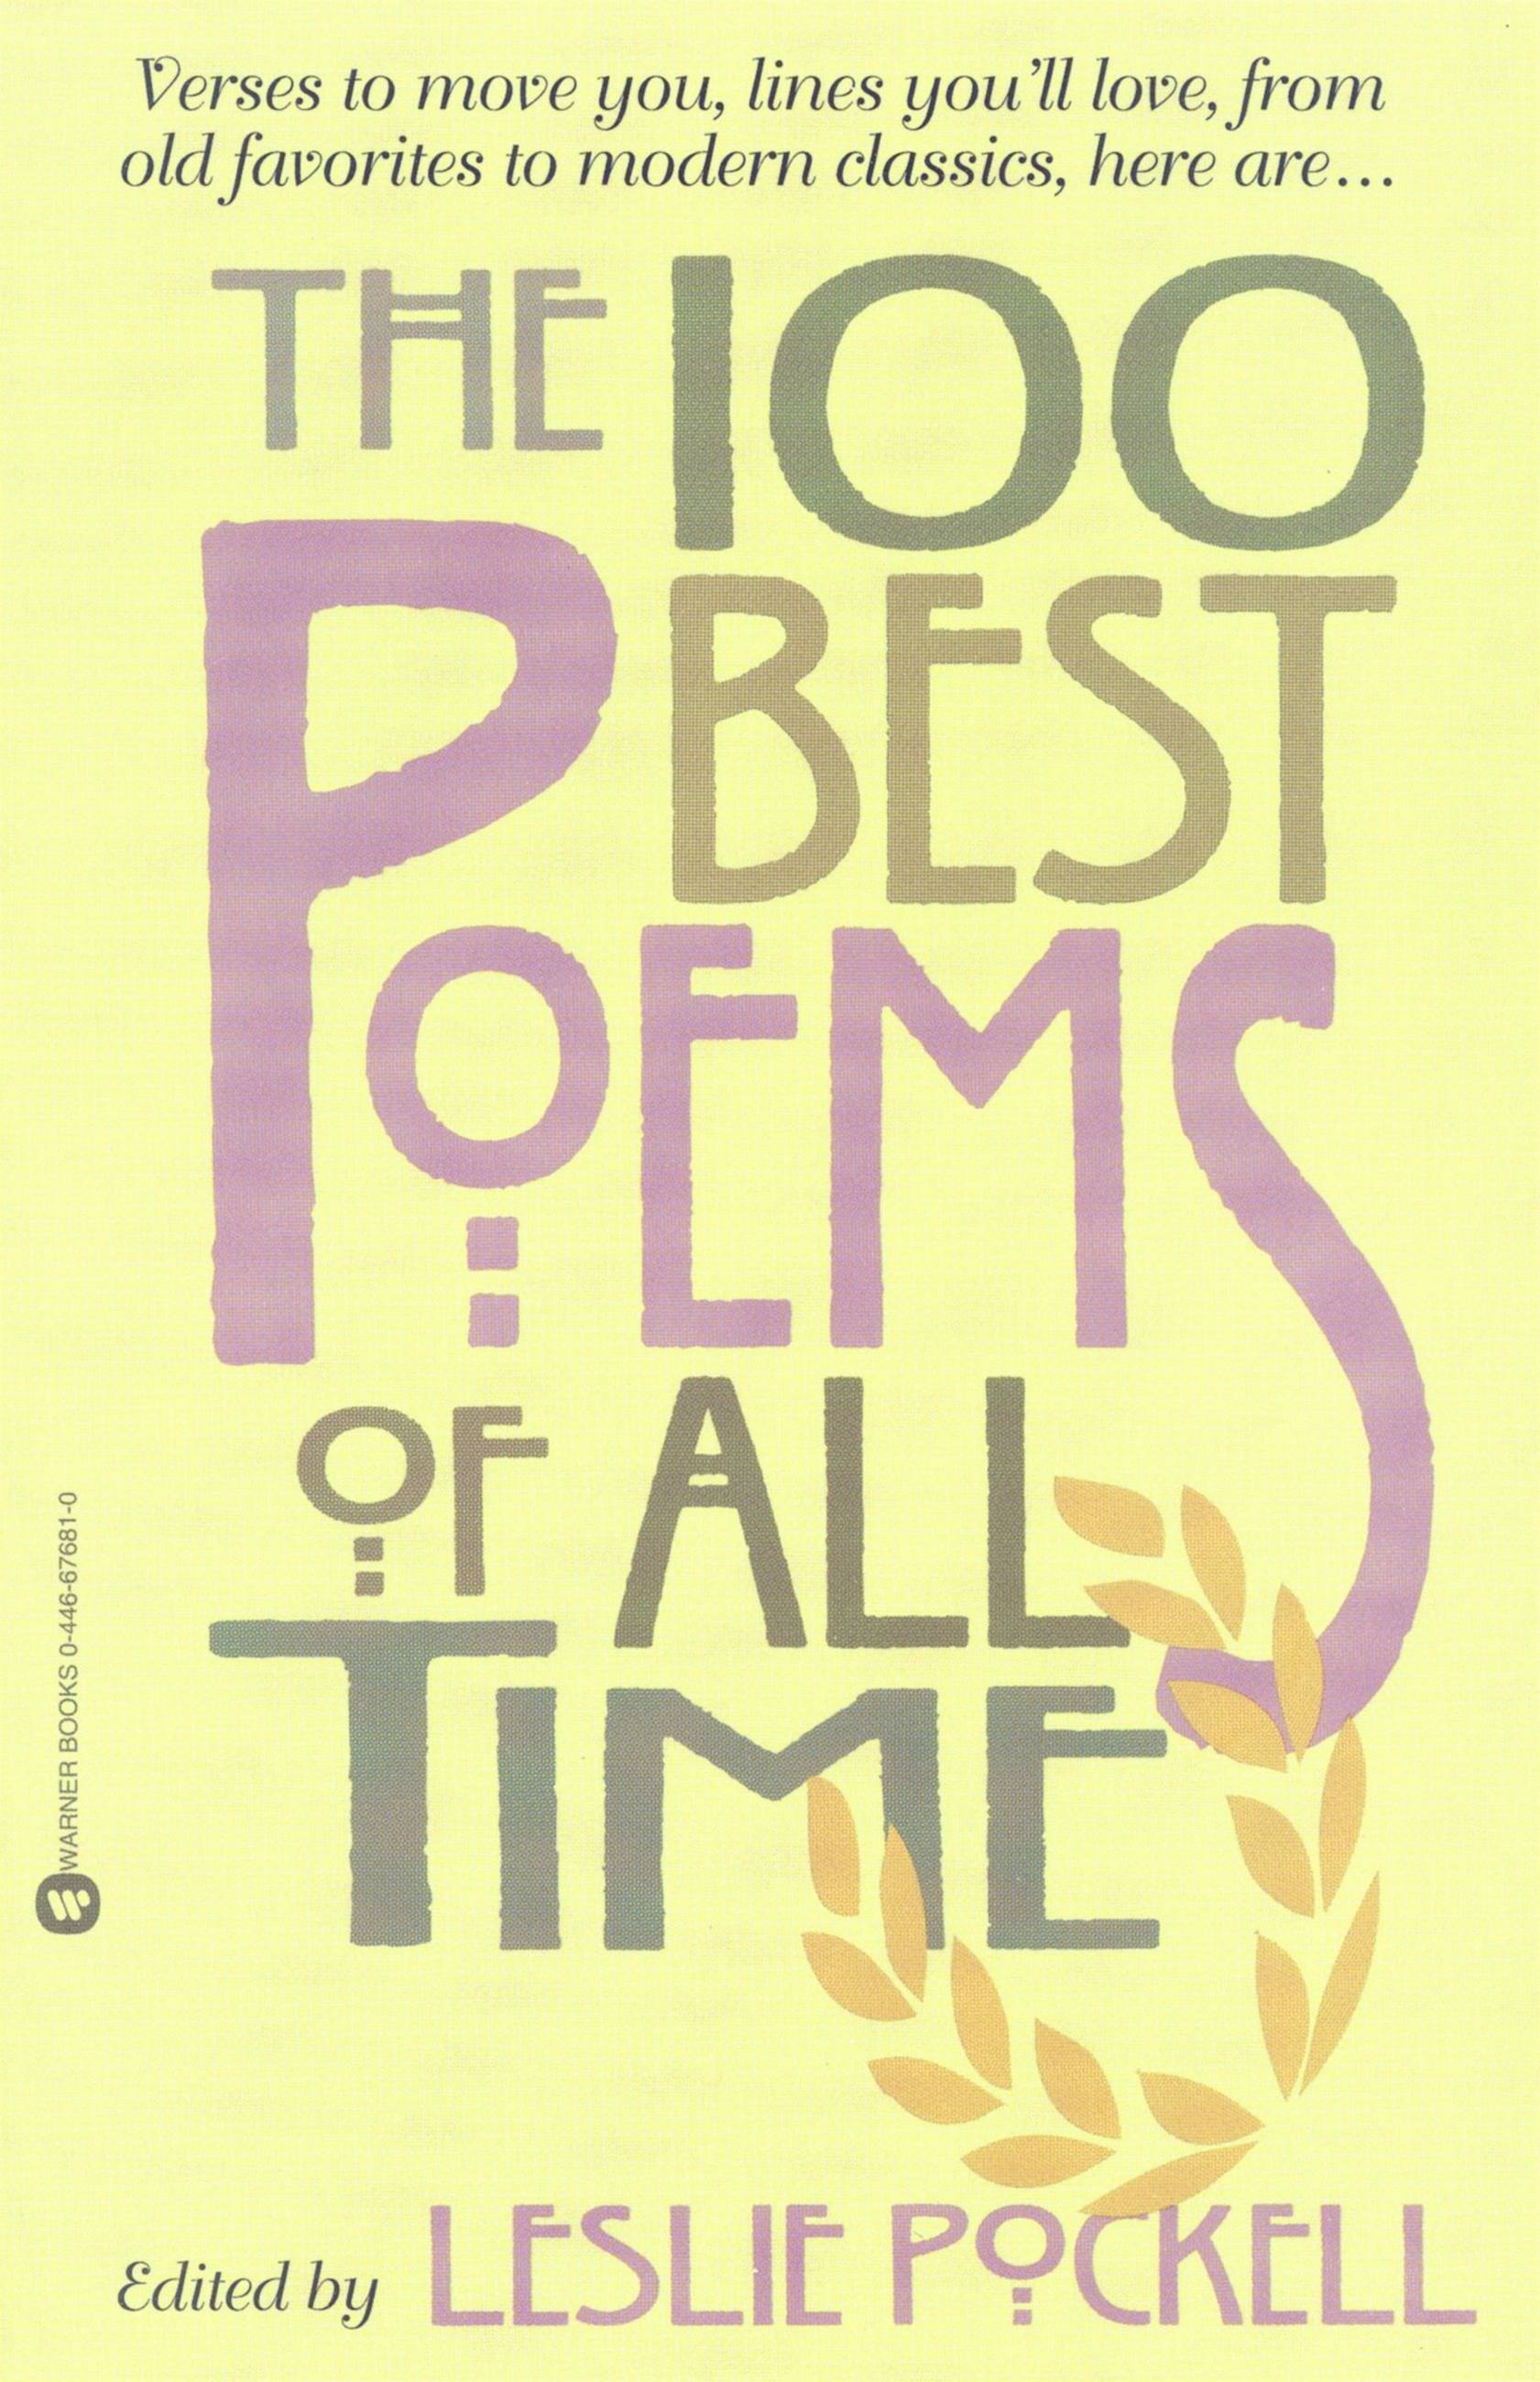 Best Poems Of All Time The 100 Best Poems of All Time by Leslie Pockell | Hachette Book Group